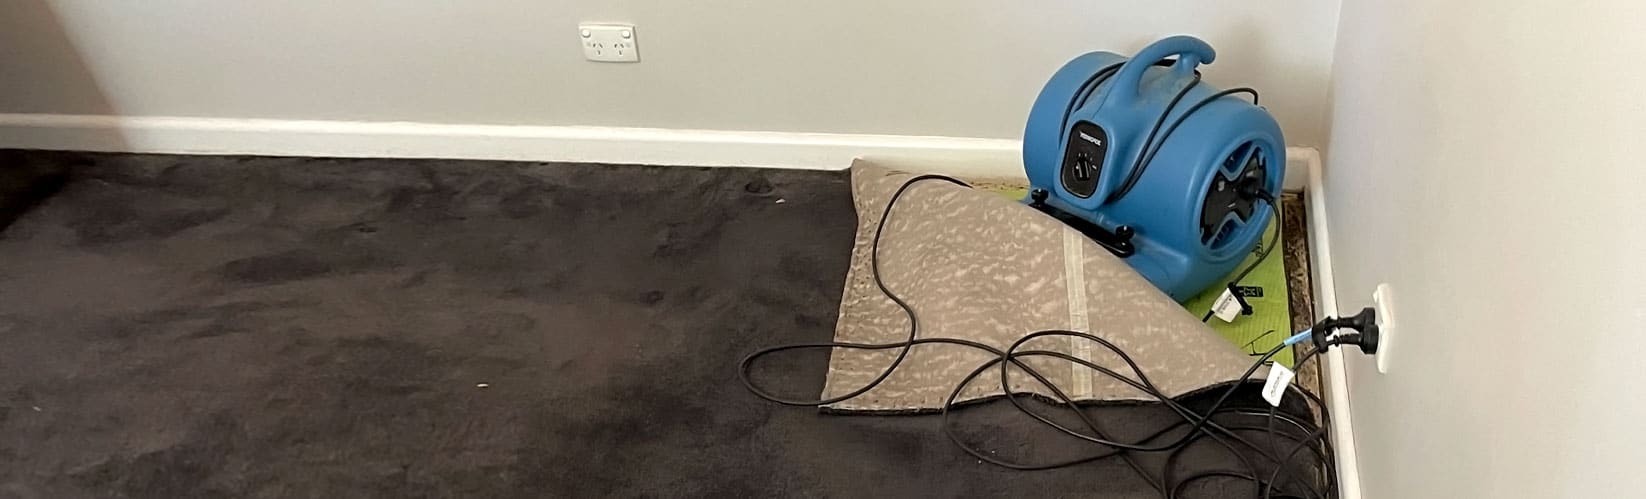 Six Ways to Dry Carpet to Prevent Irreparable Damage